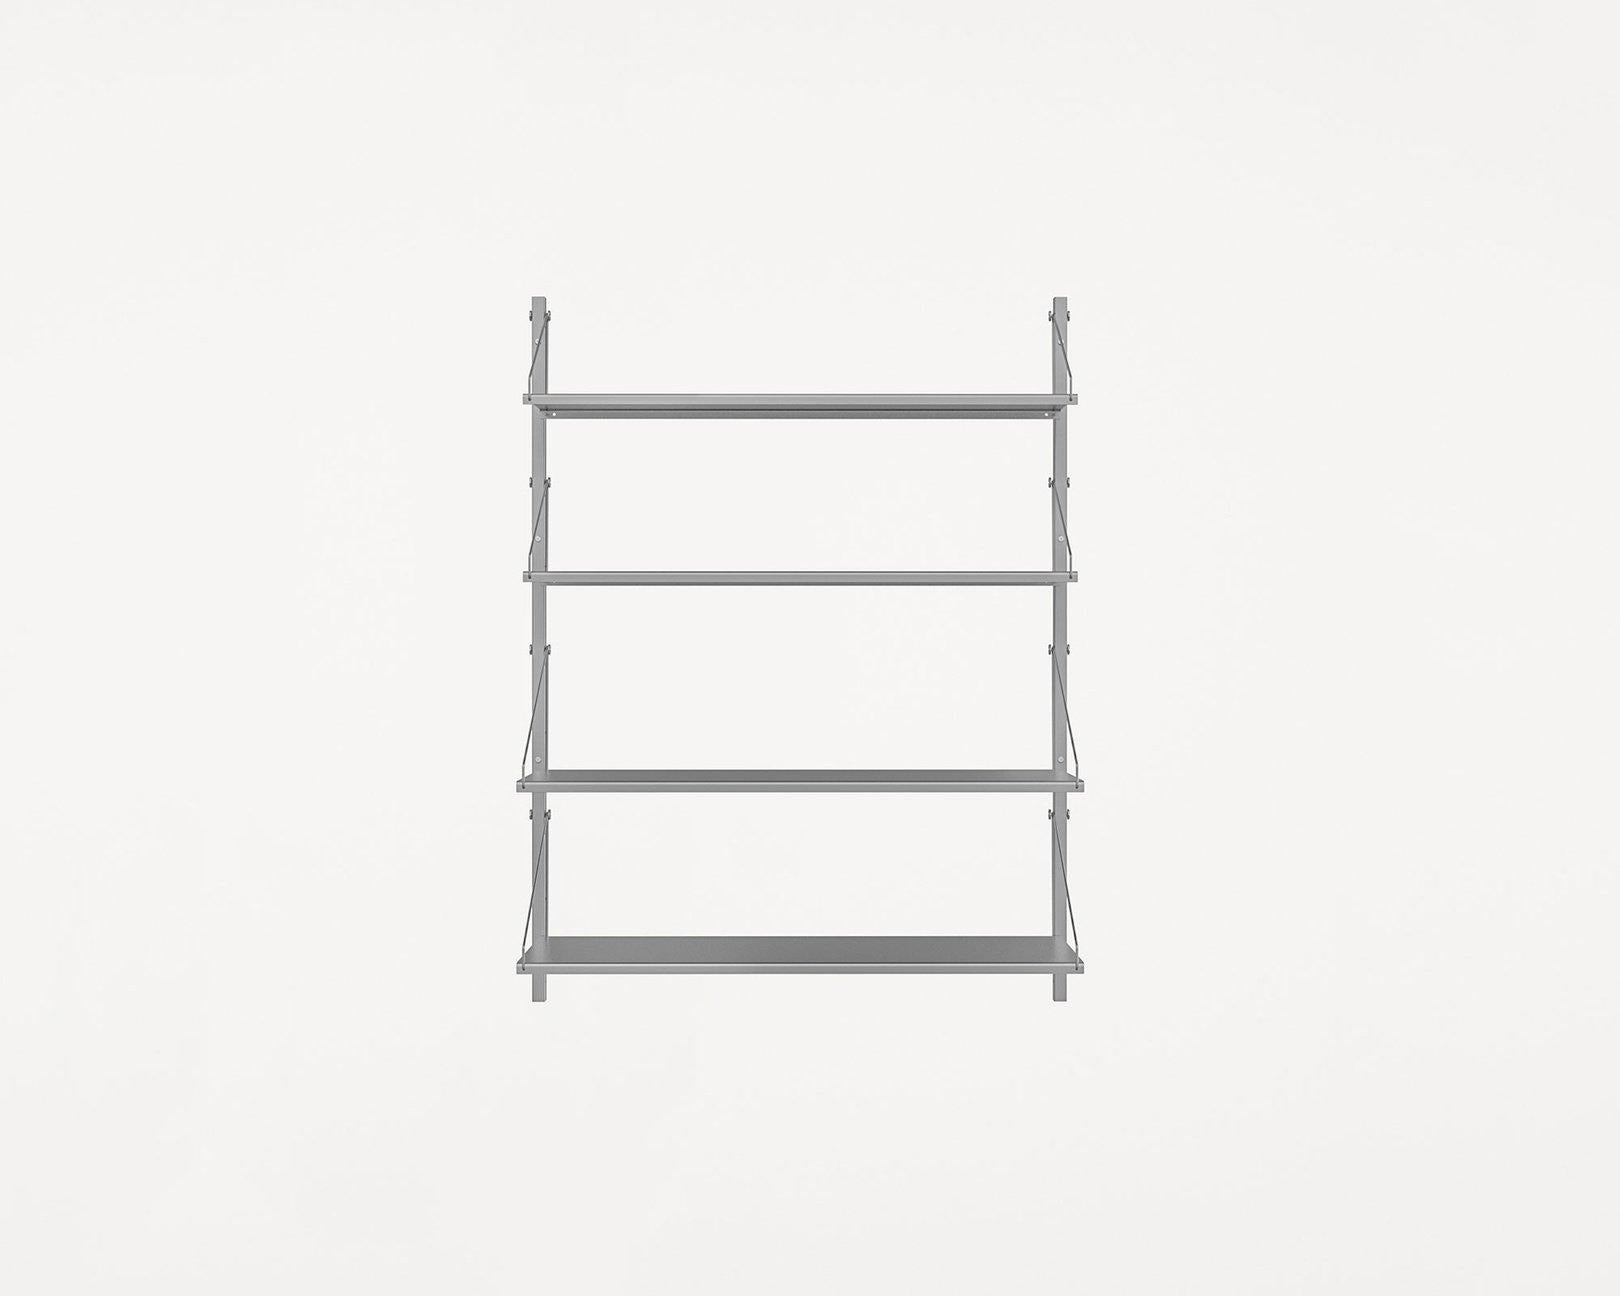 Shelf Library Stainless Steel is a natural extension of Frama’s Shelf Library universe. Characterised by a modular system and fastened with solid steel screws on stainless steel rails, the shelves can be easily placed and re-styled in a variety of